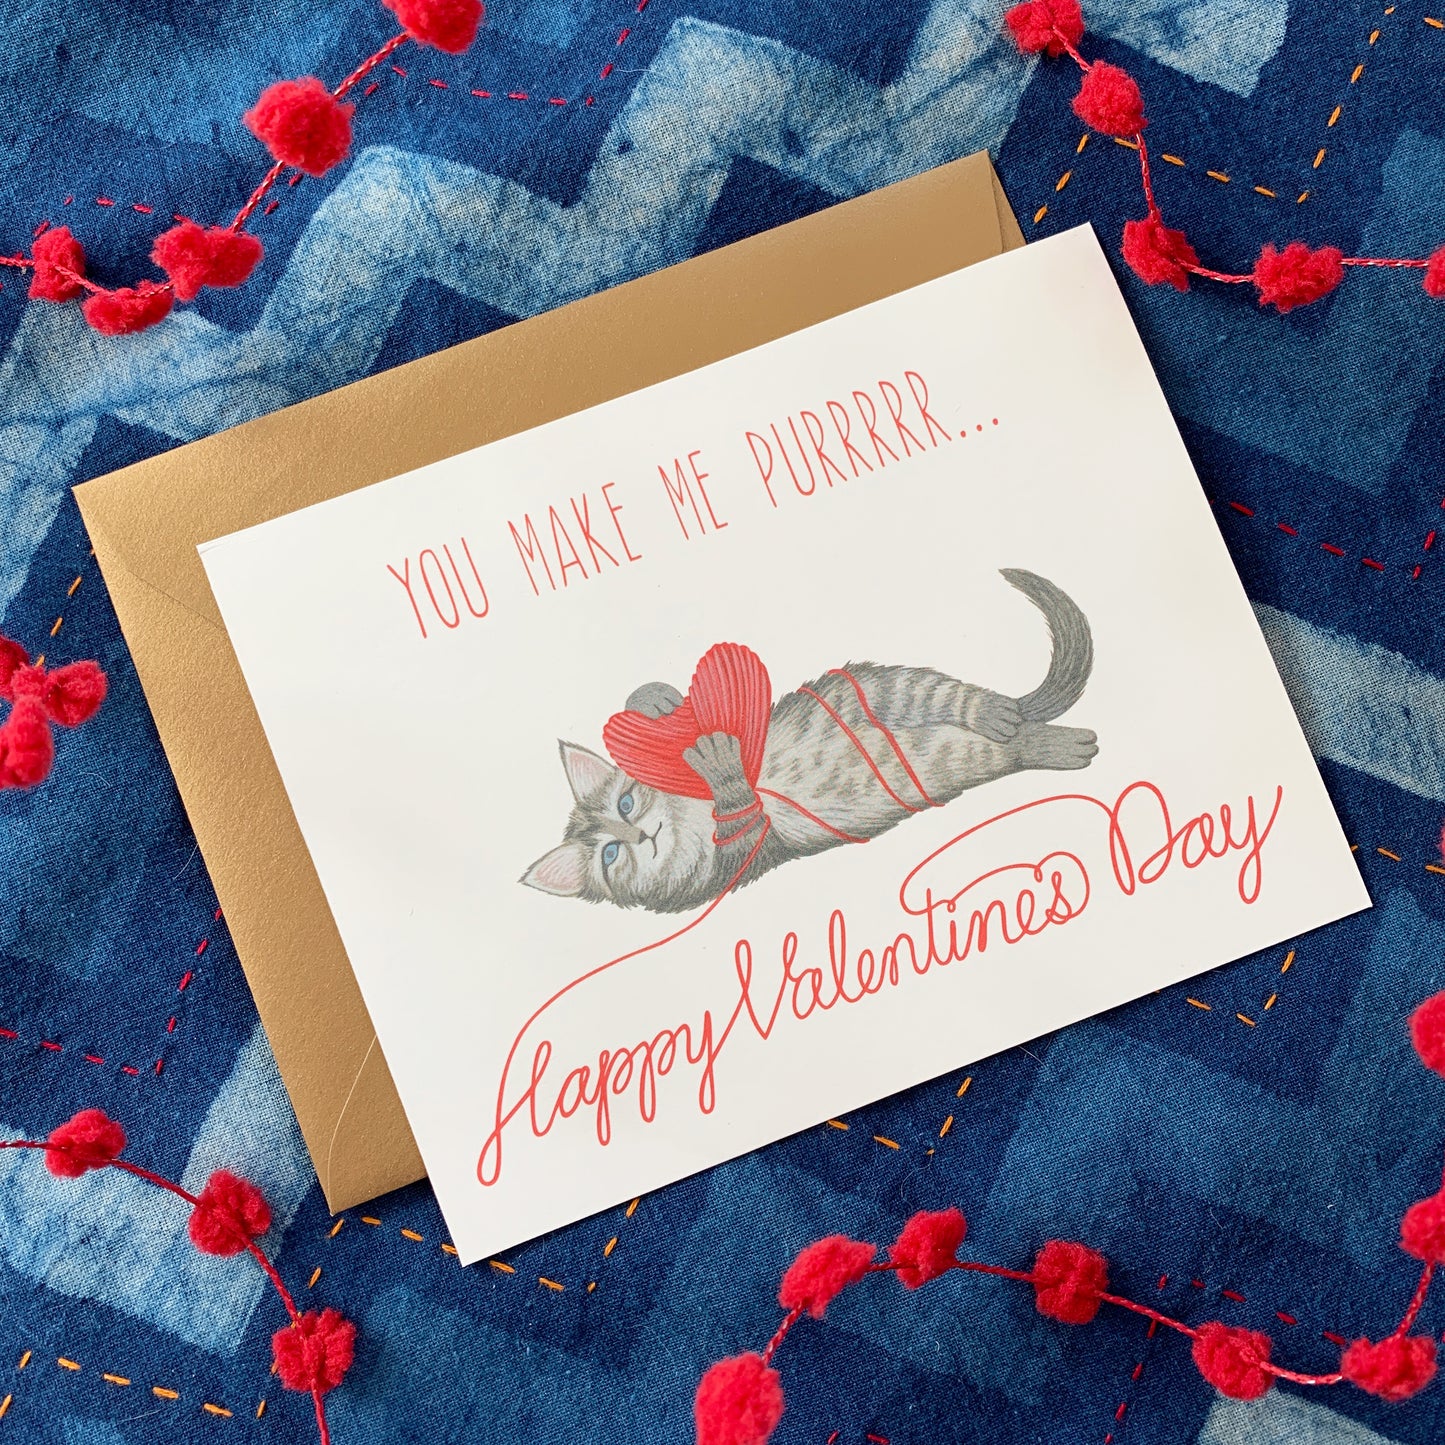 PURRING KITTEN AND BALL OF YARN - VALENTINE'S DAY GREETING CARD